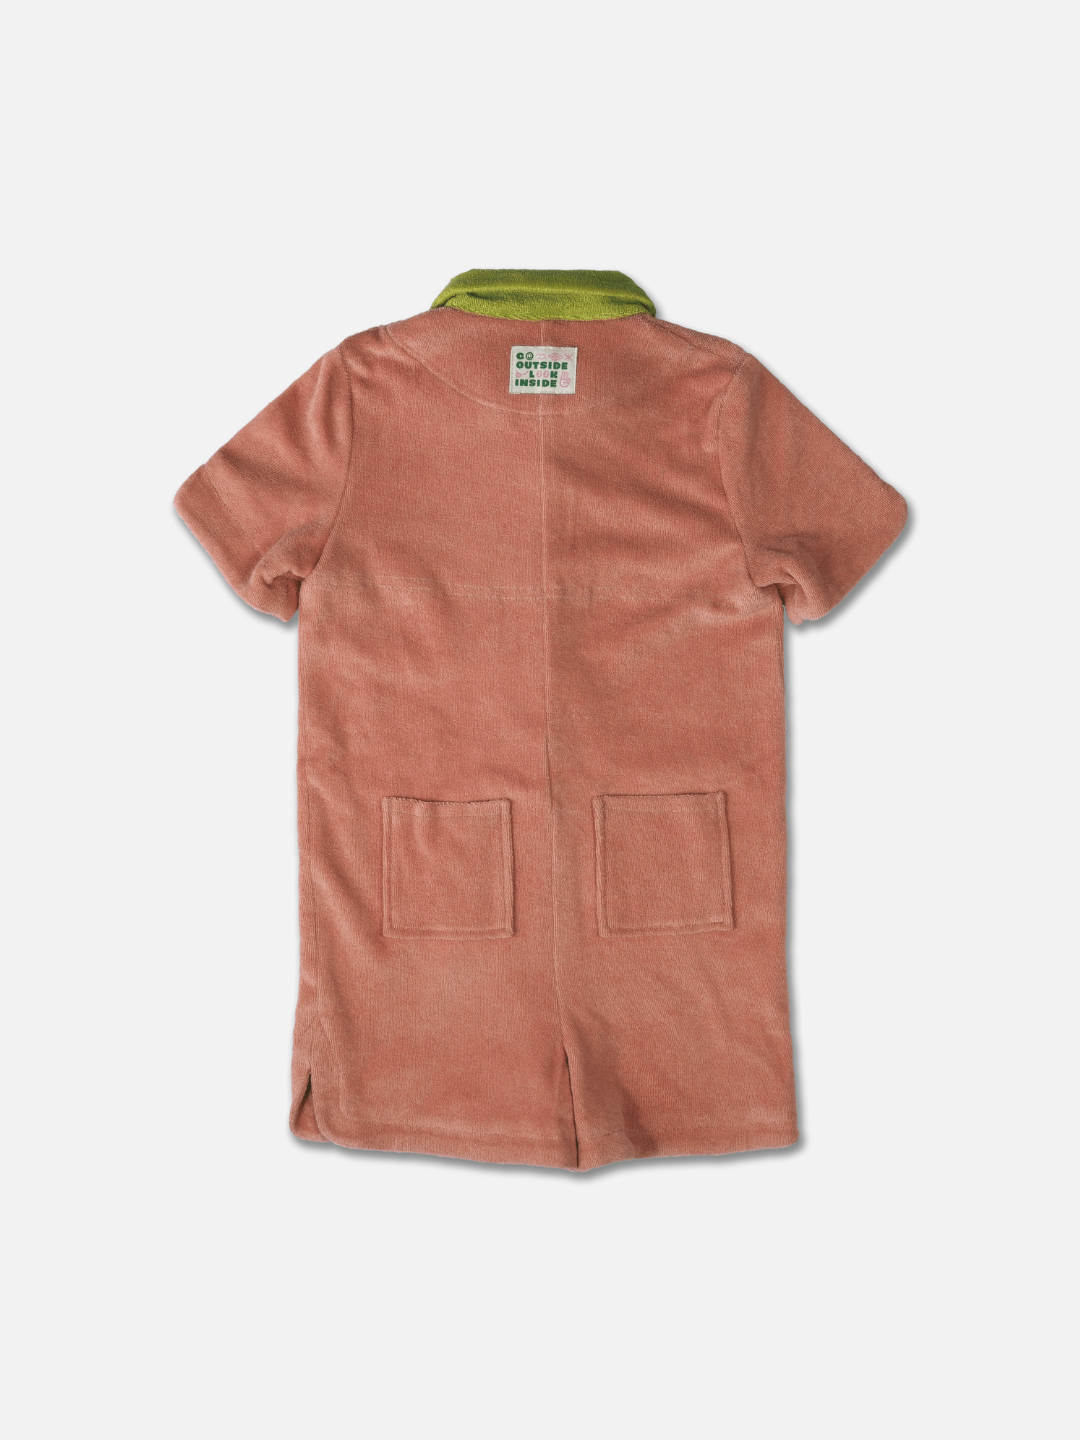 Peach | Rear view of a kids' jumpsuit in peach, with lime green collar and two back pockets